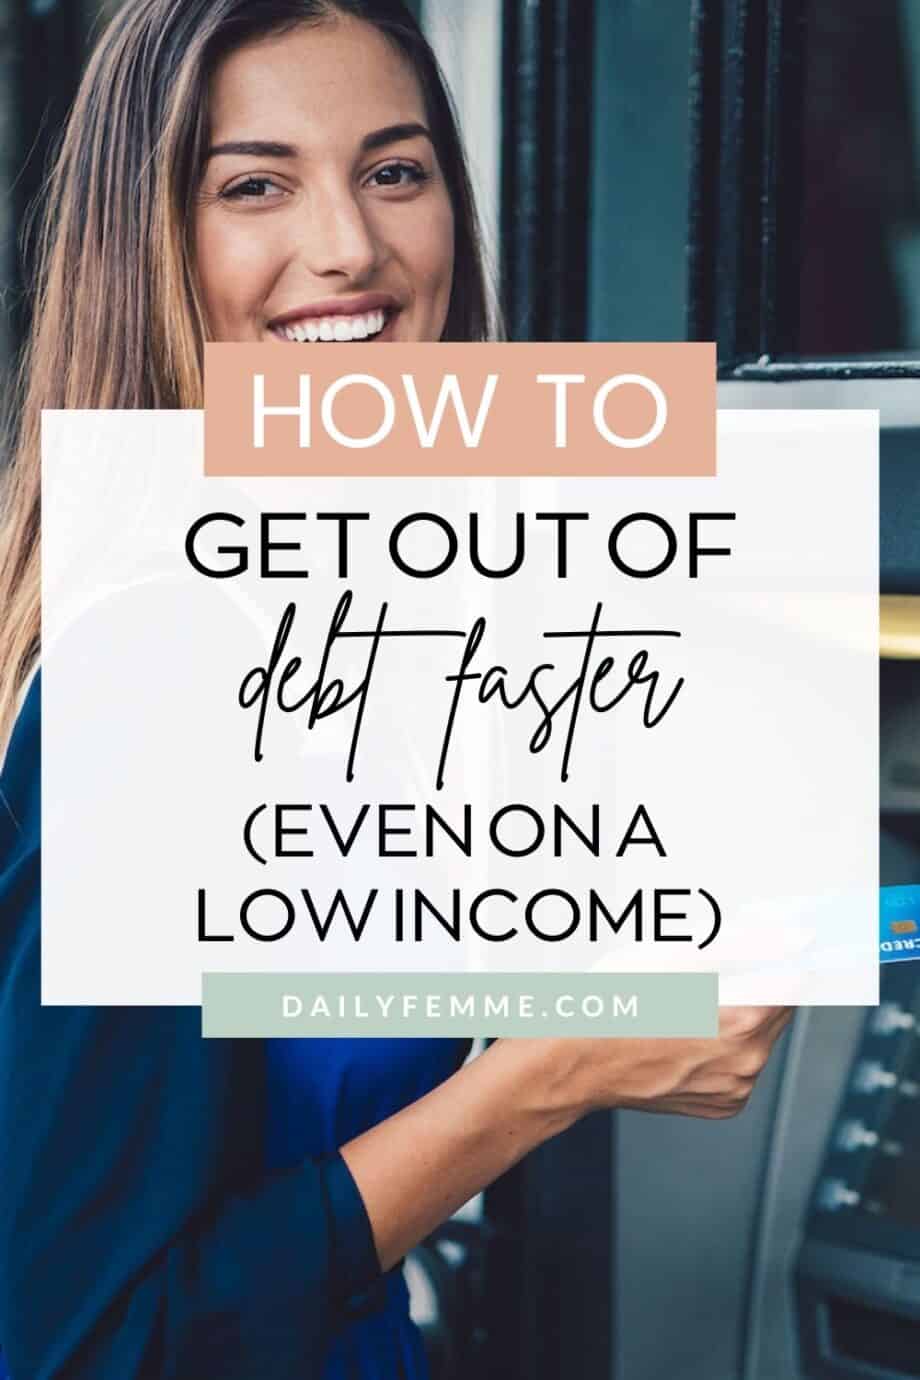 If you've ever wondered how to get out of debt faster and what you can do besides paying the minimum amount, then these tips are for you.